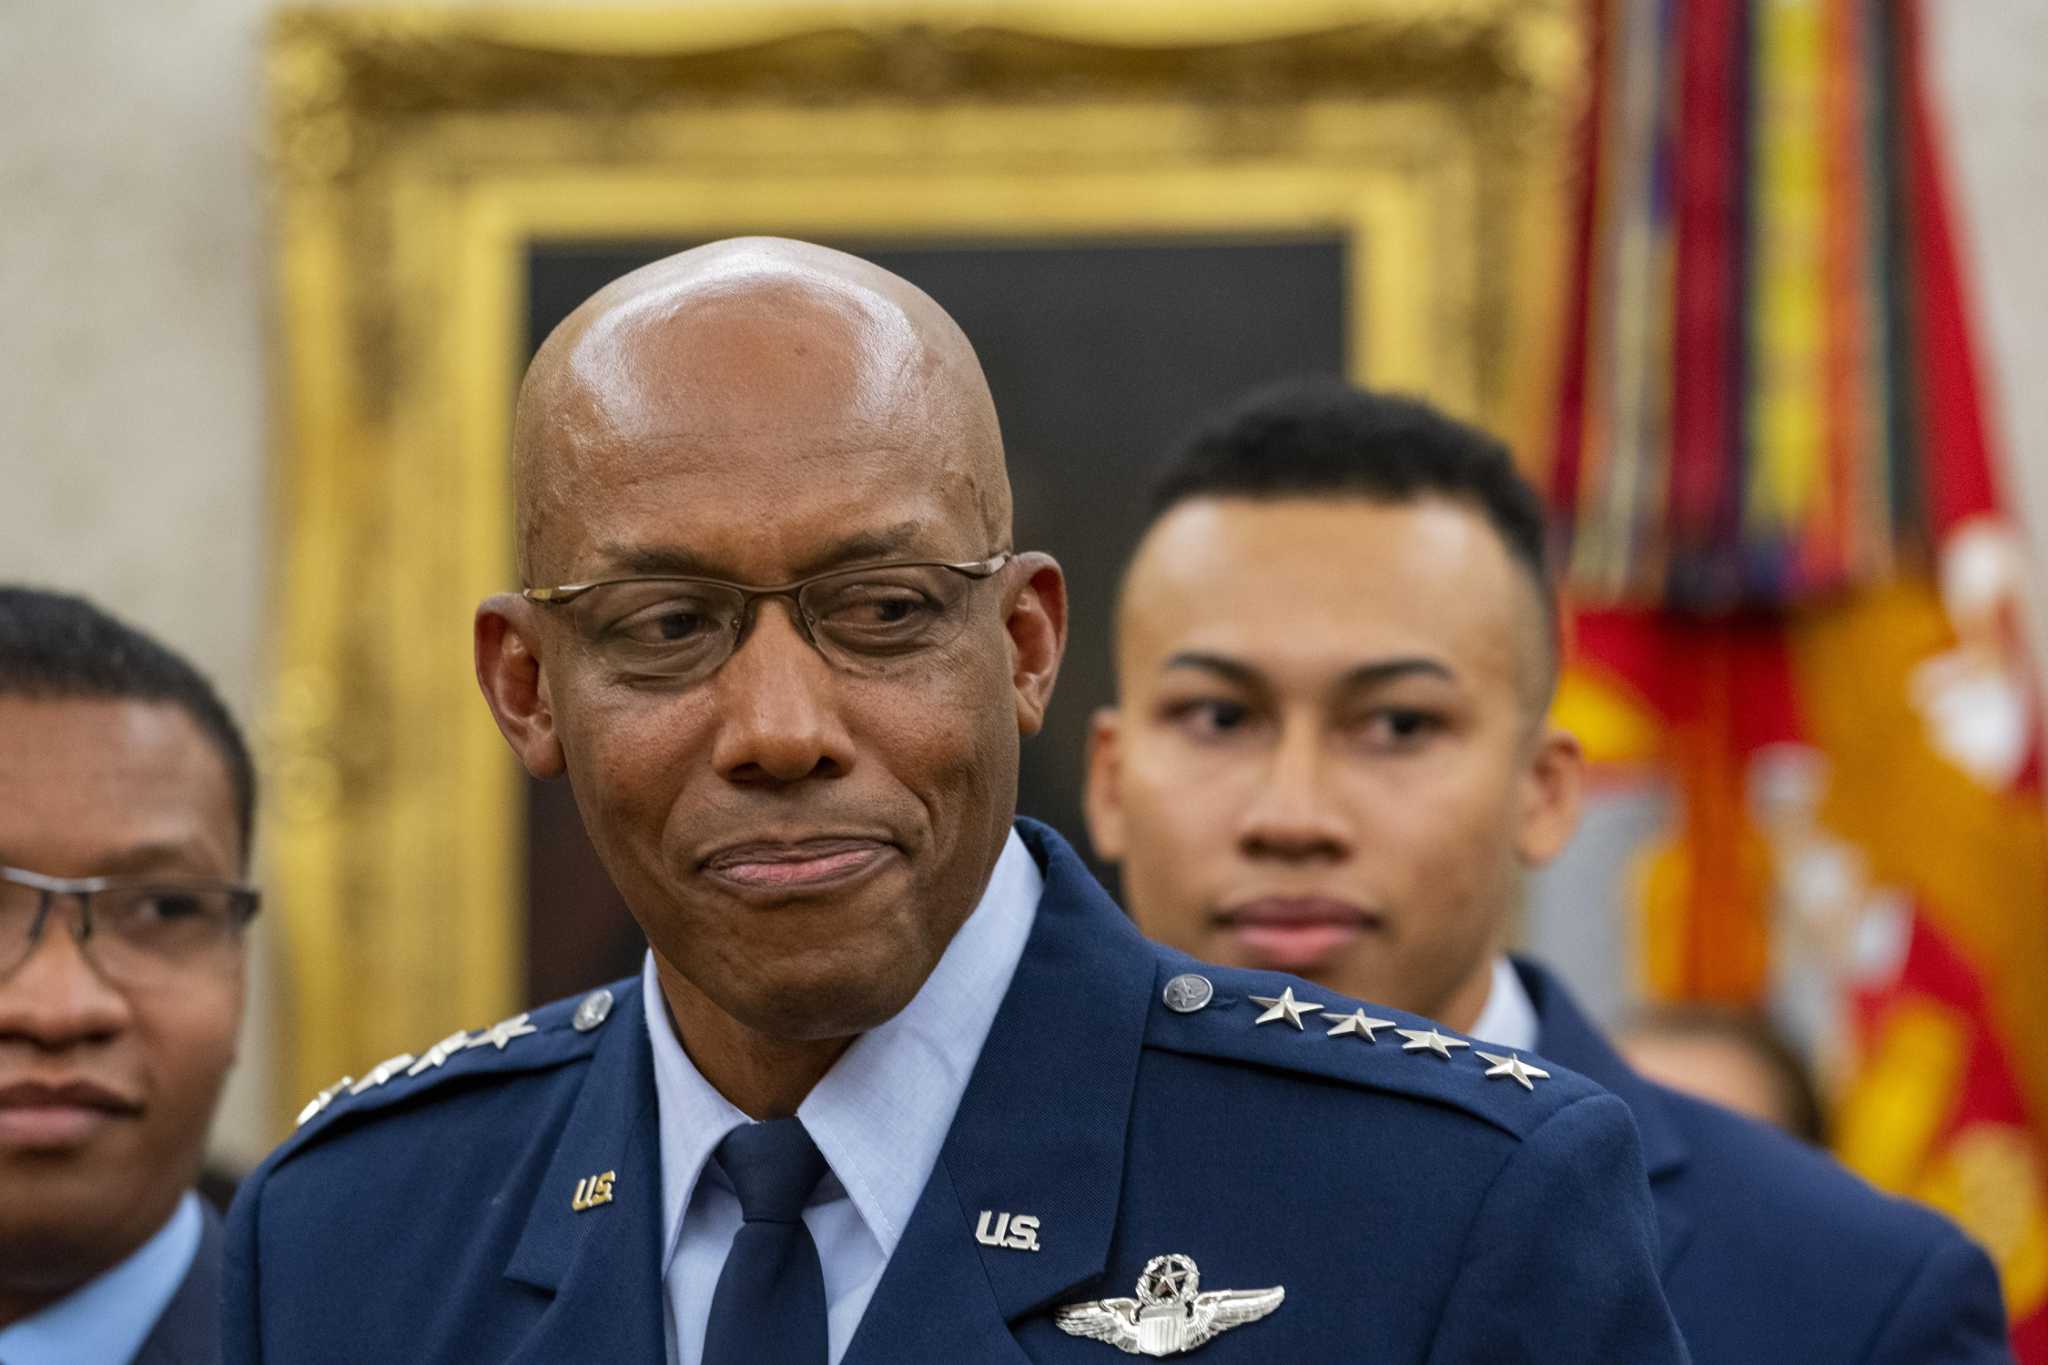 San Antonio native becomes the first African American to lead the Air Force